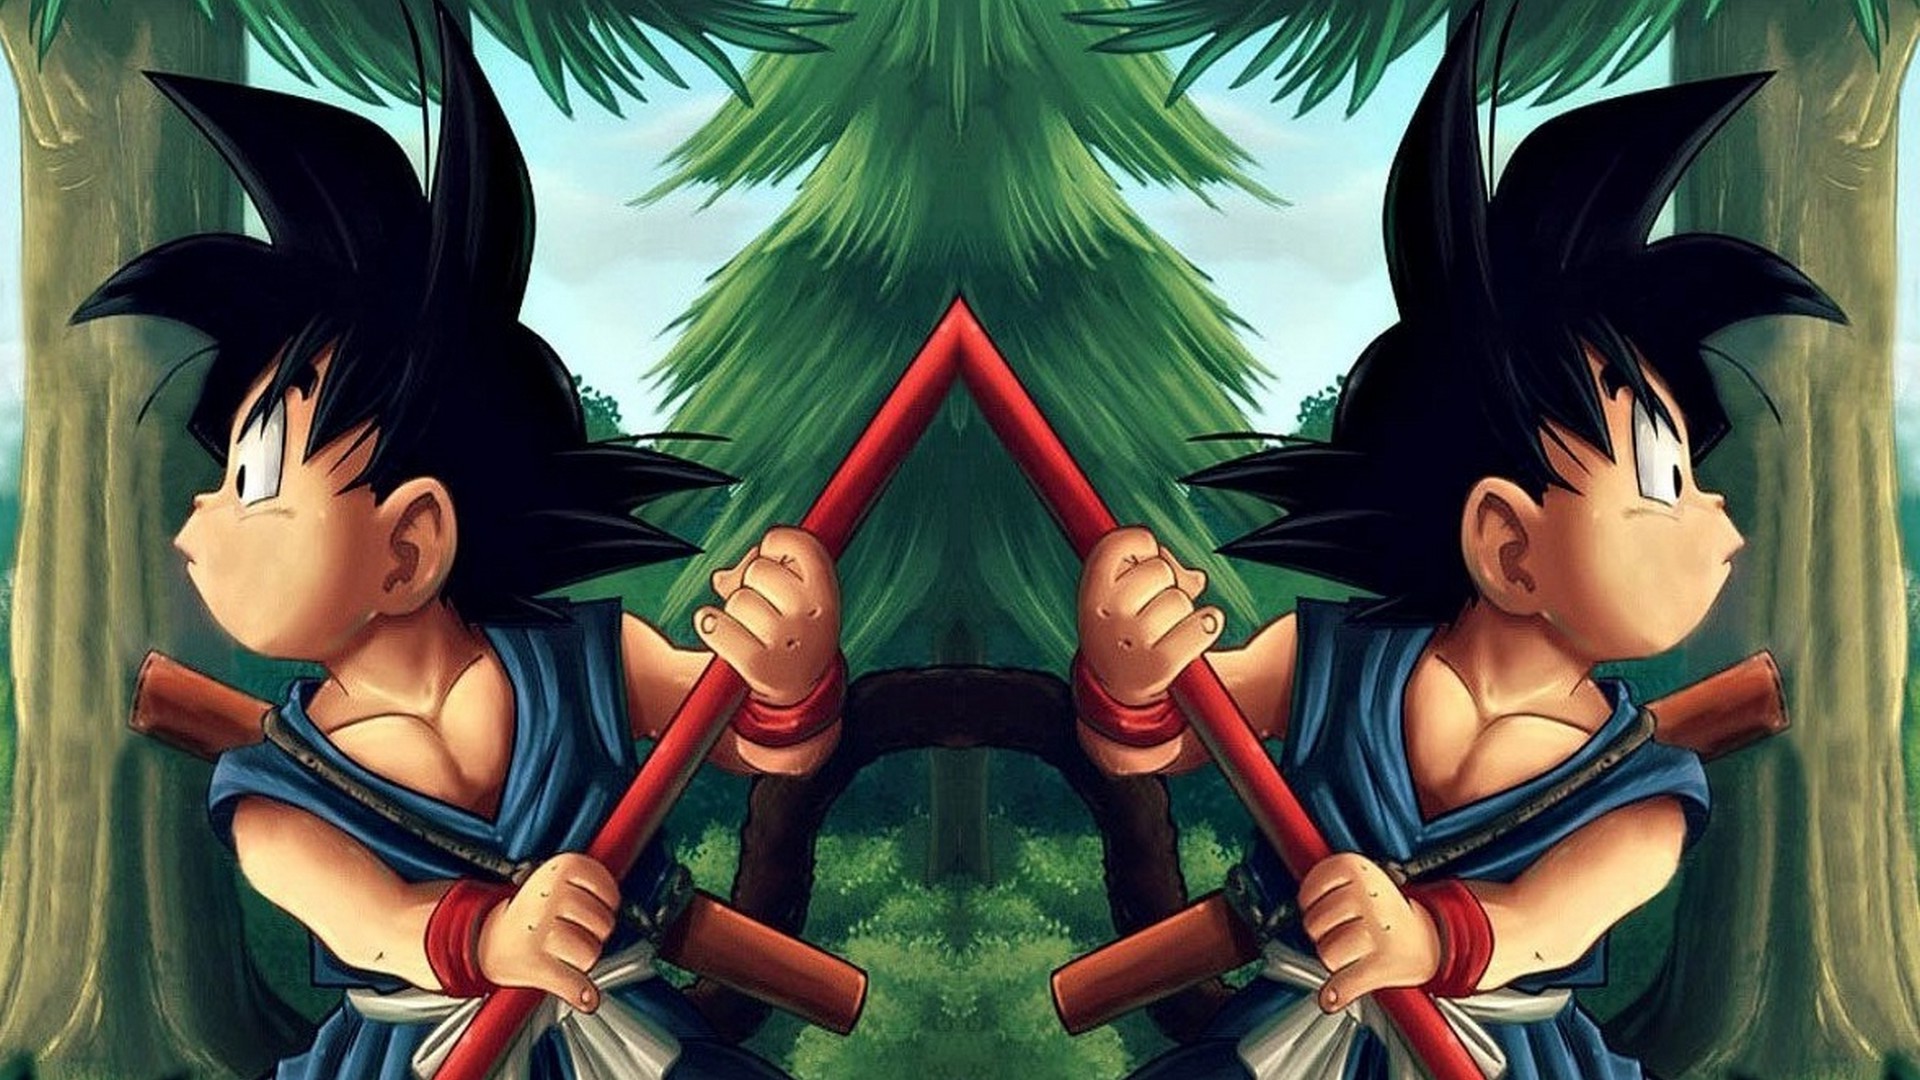 Kid Goku Background Wallpaper HD with image resolution 1920x1080 pixel. You can make this wallpaper for your Desktop Computer Backgrounds, Mac Wallpapers, Android Lock screen or iPhone Screensavers